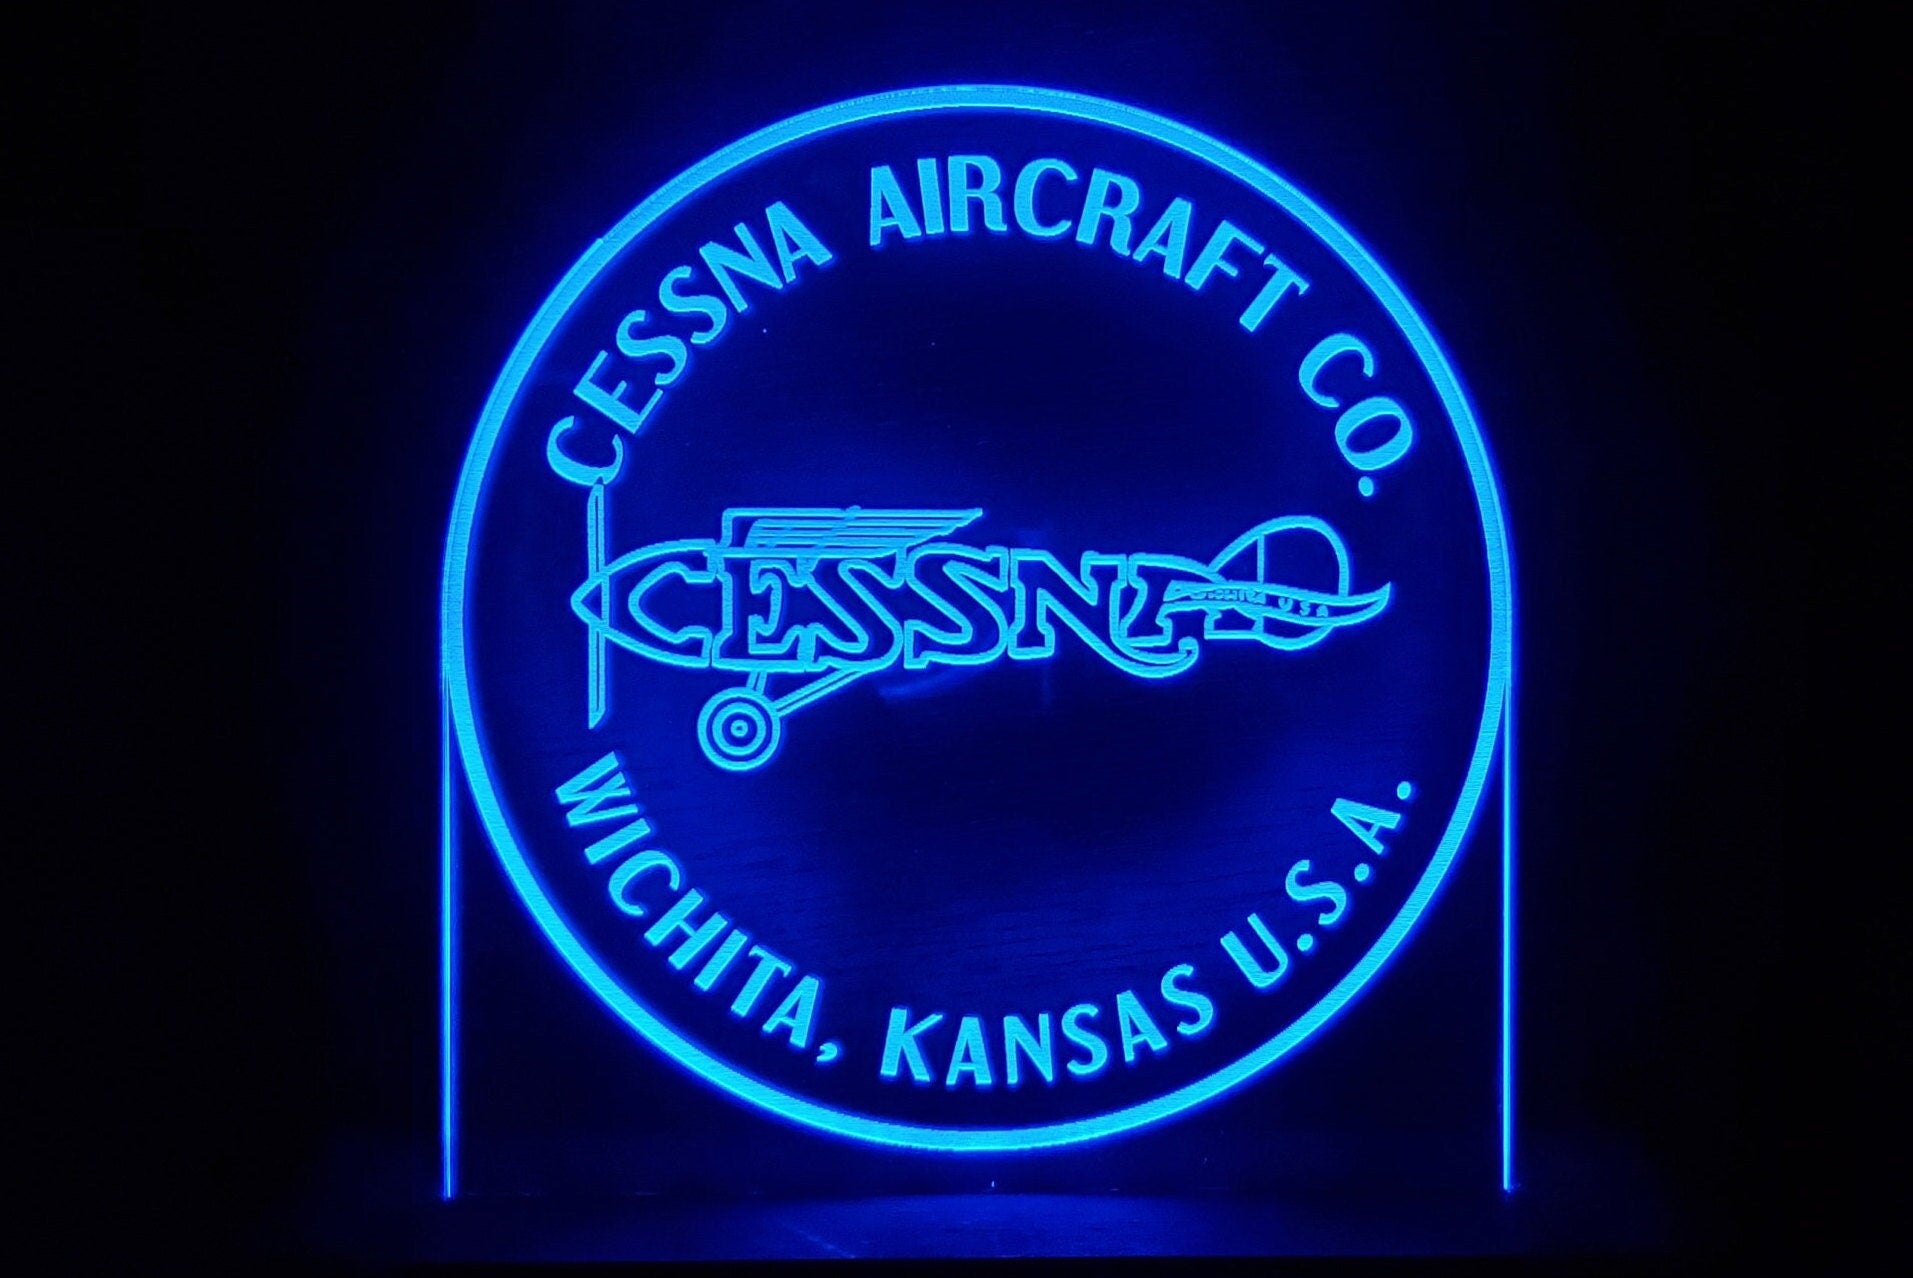 Vintage Cessna round logo LED light lamp/sign - Neon-like - Free shipping - Made in USA.